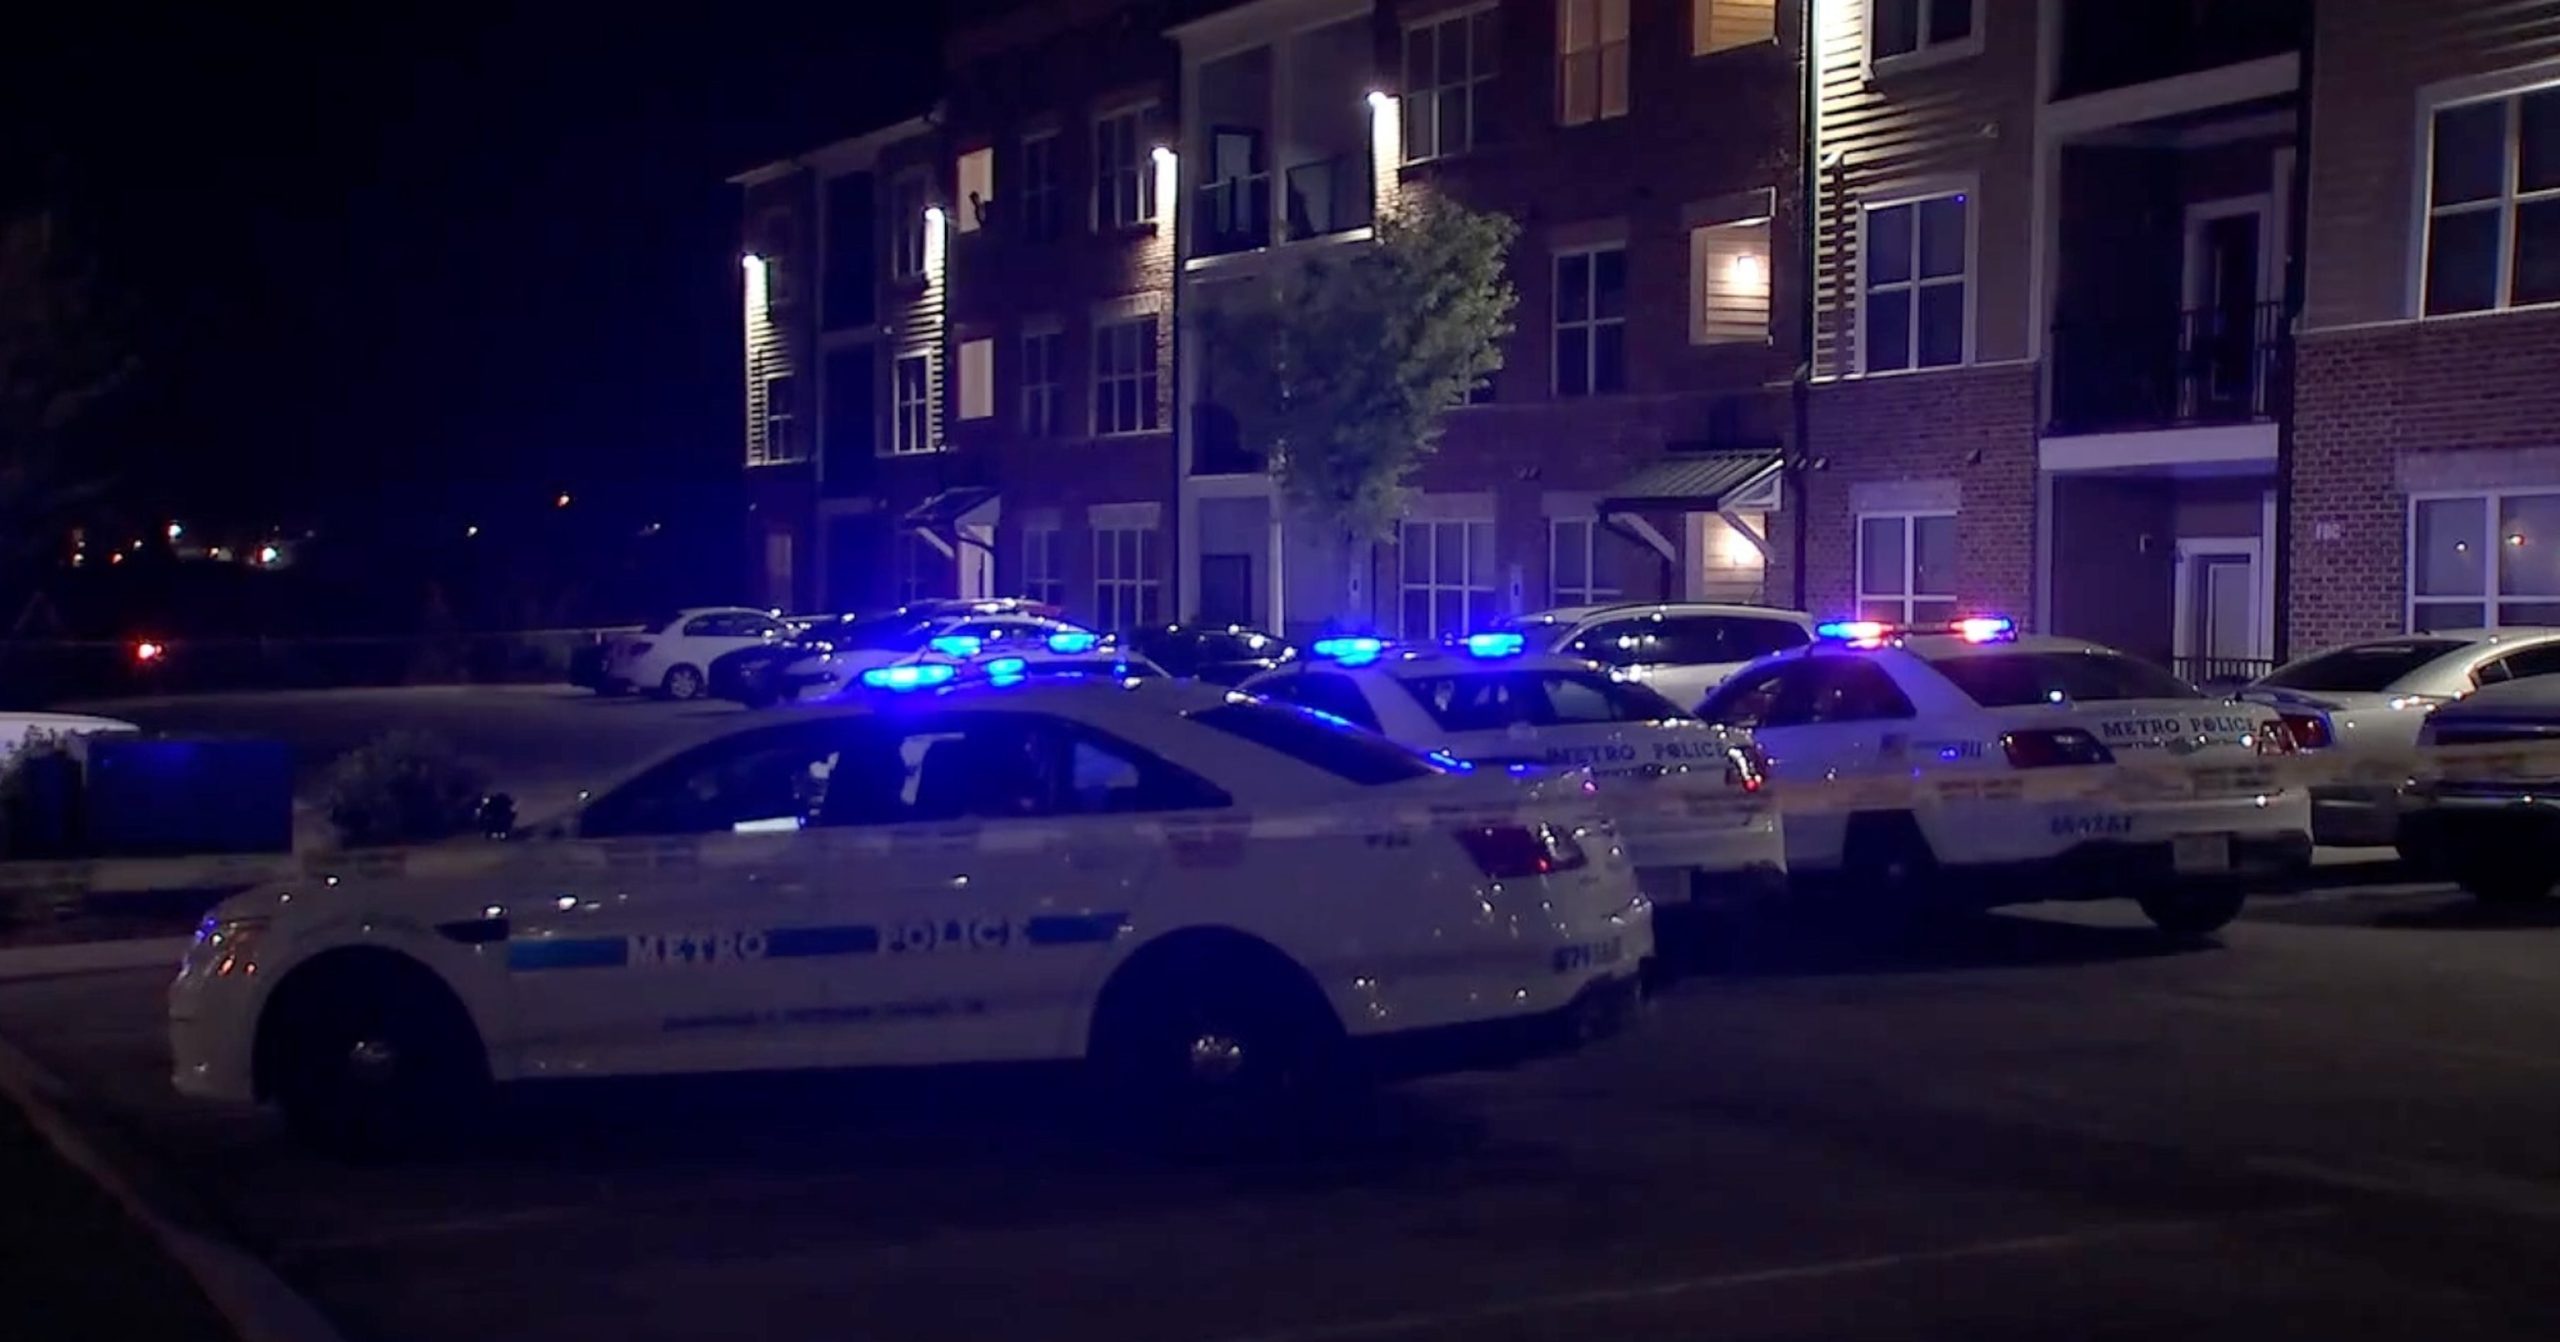 Police confirm that 2 teenagers were targeted and fatally shot at a Nashville apartment complex